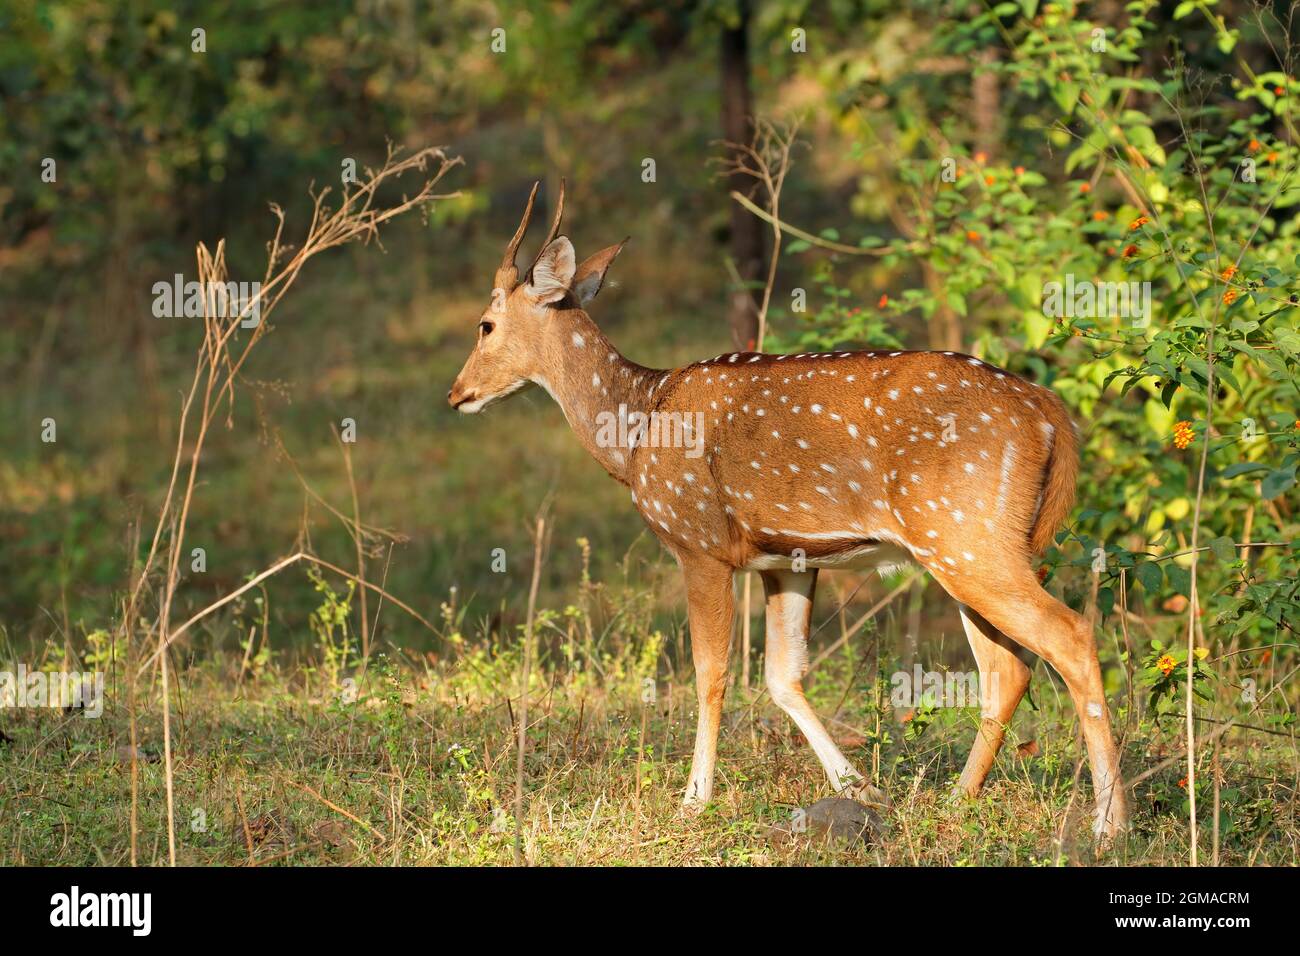 A male spotted deer or chital (Axis axis) in natural habitat, Kanha National Park, India Stock Photo